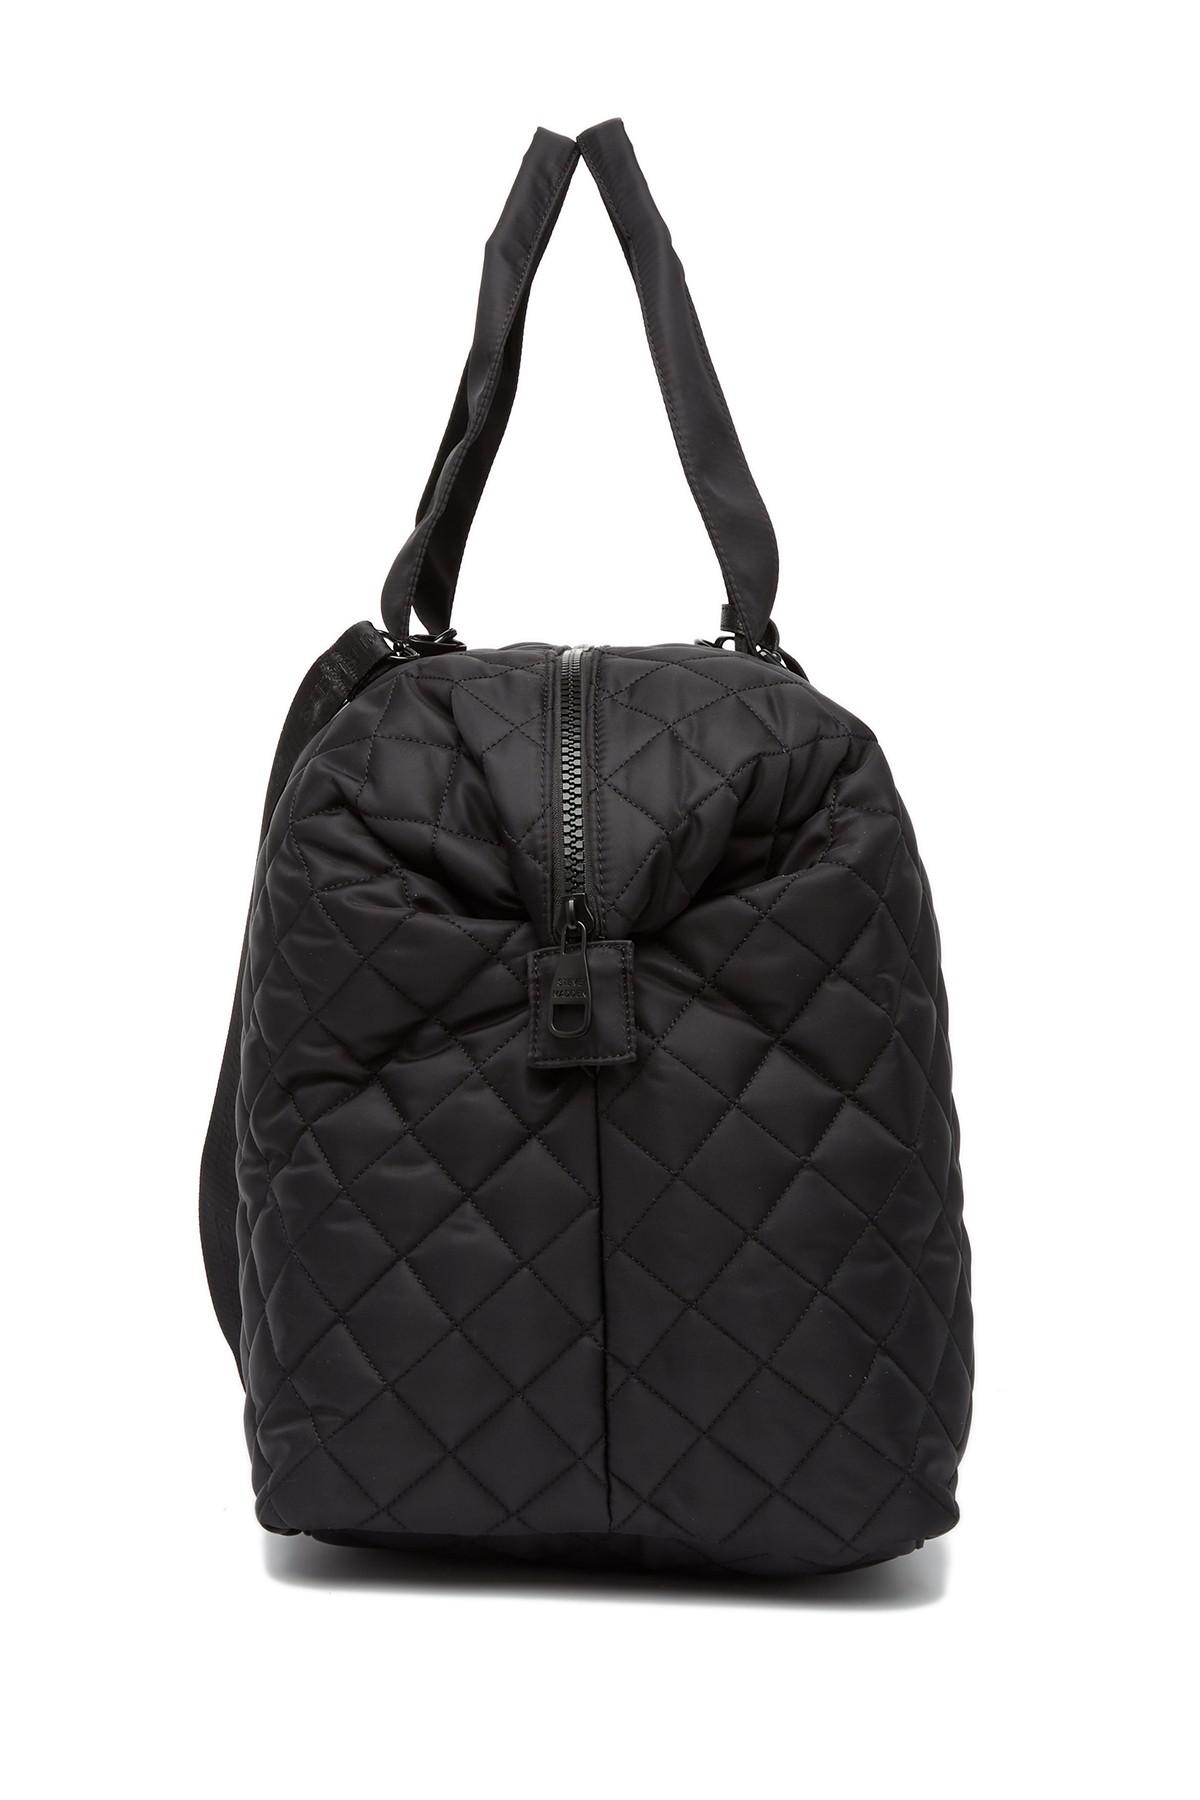 Steve Madden Quilted Nylon Weekend Bag in Black - Lyst